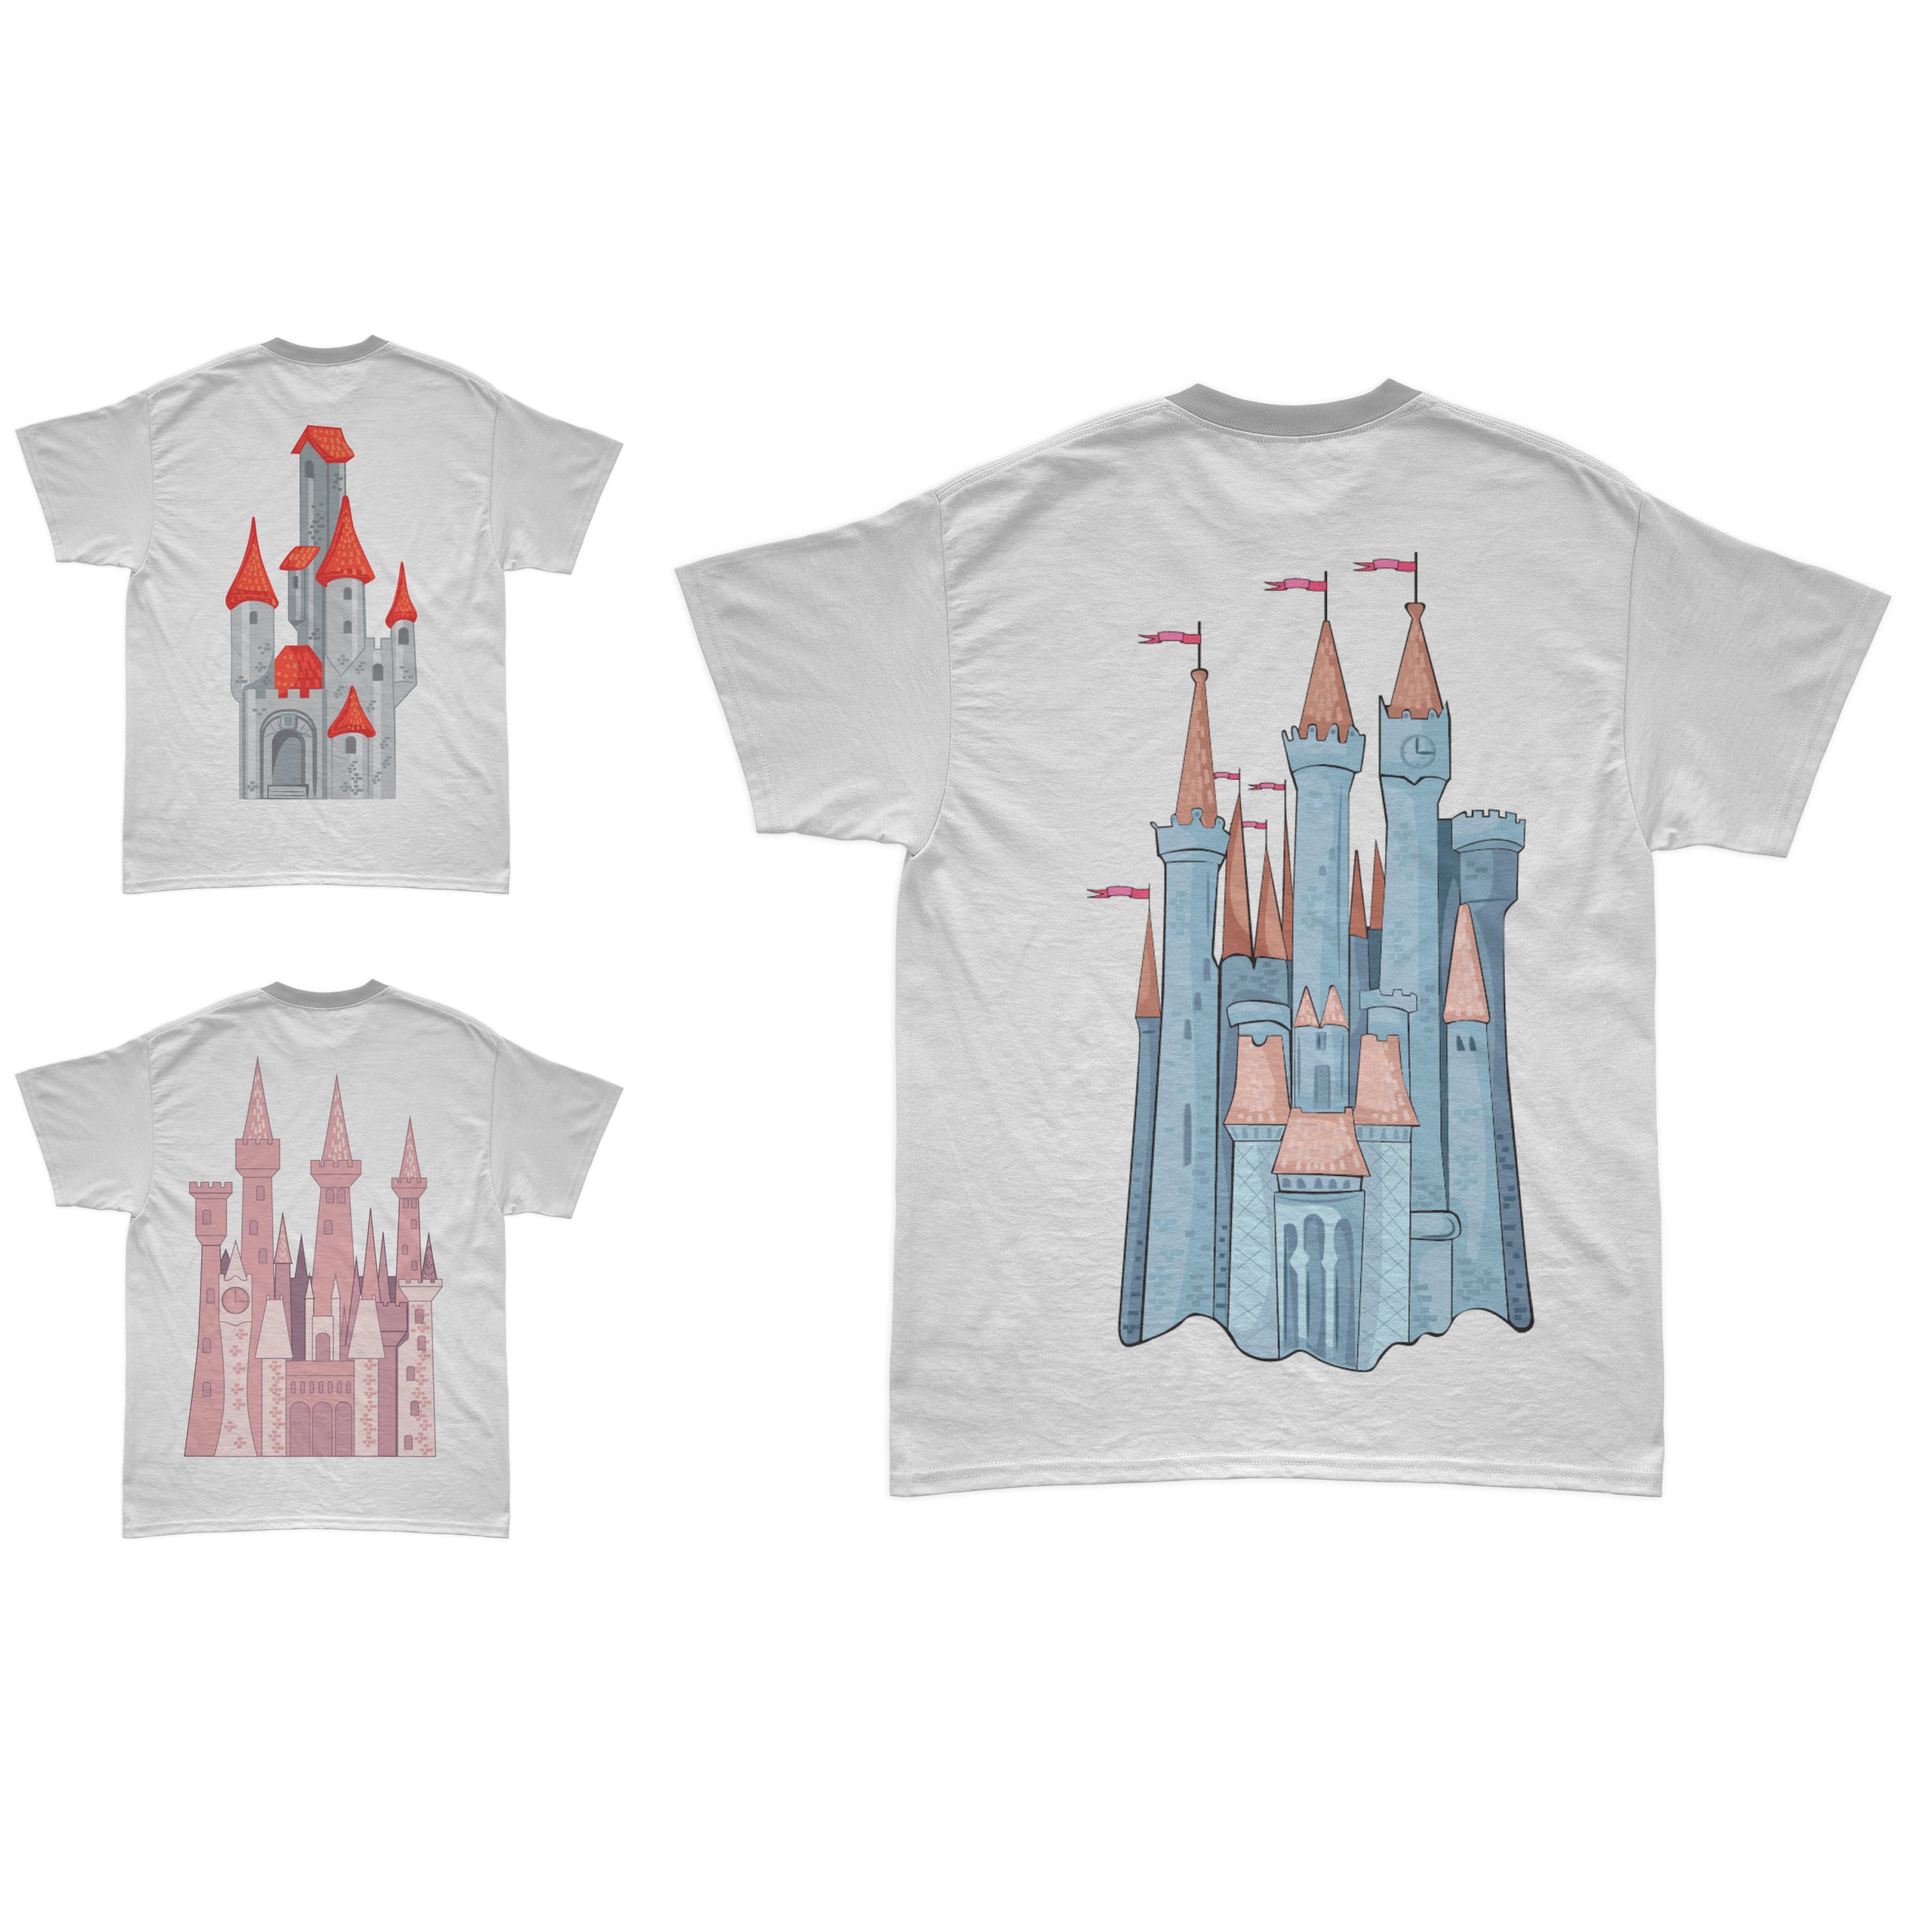 Collection of images of T-shirts with gorgeous print of Cinderella's castle.